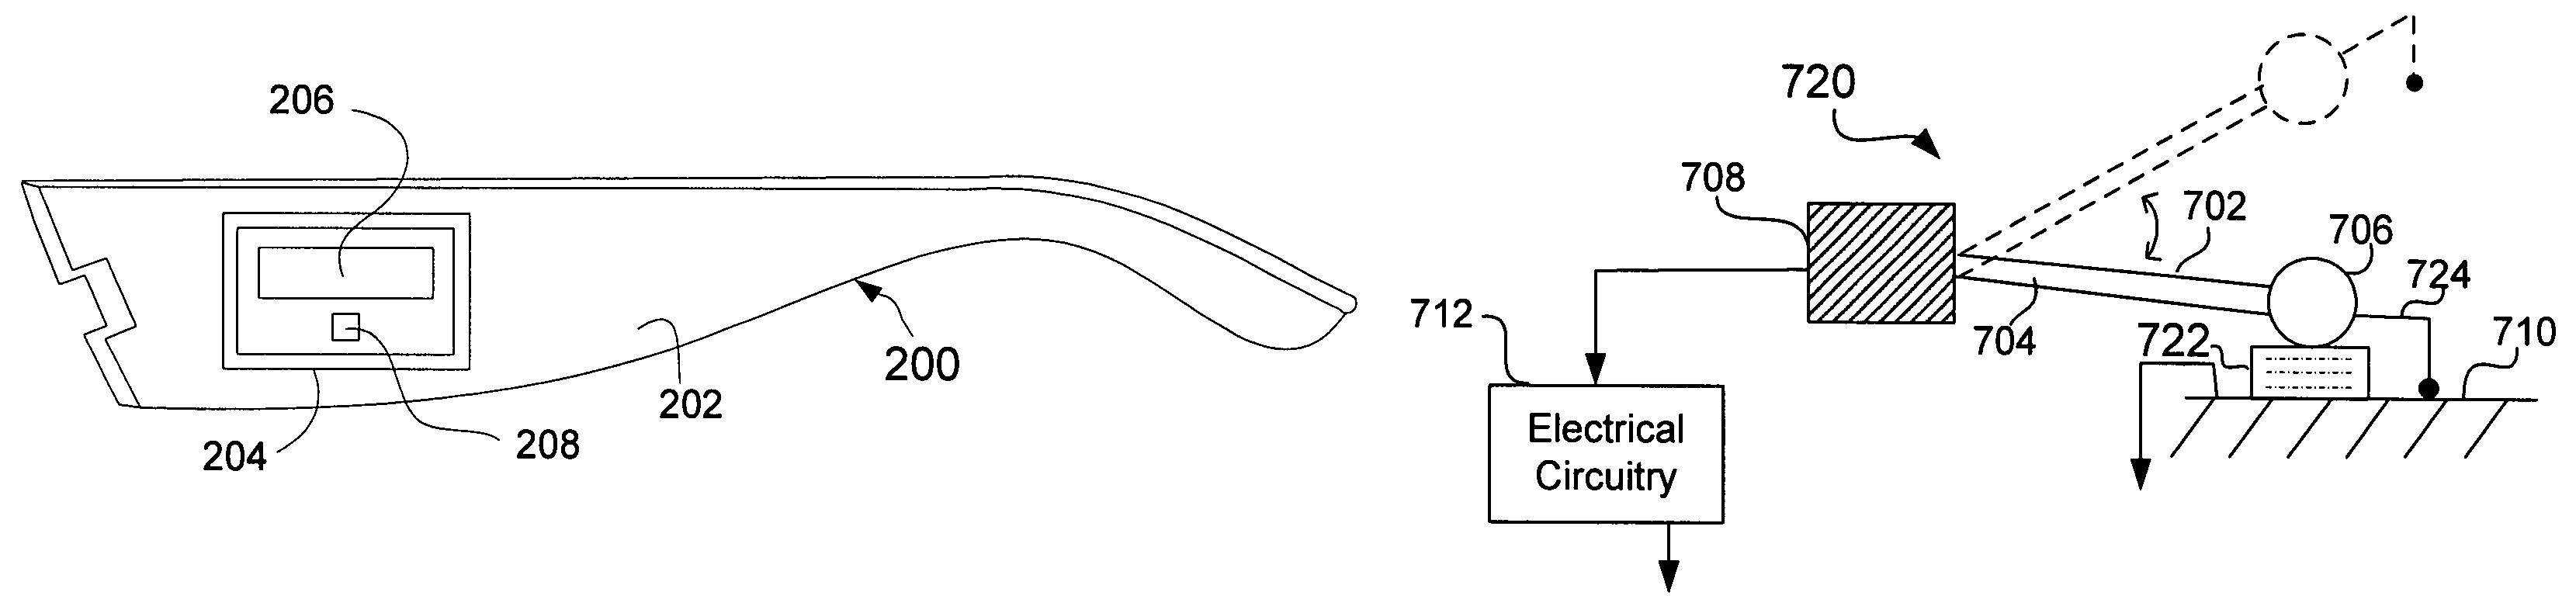 Eyeglasses with activity monitoring and acoustic dampening